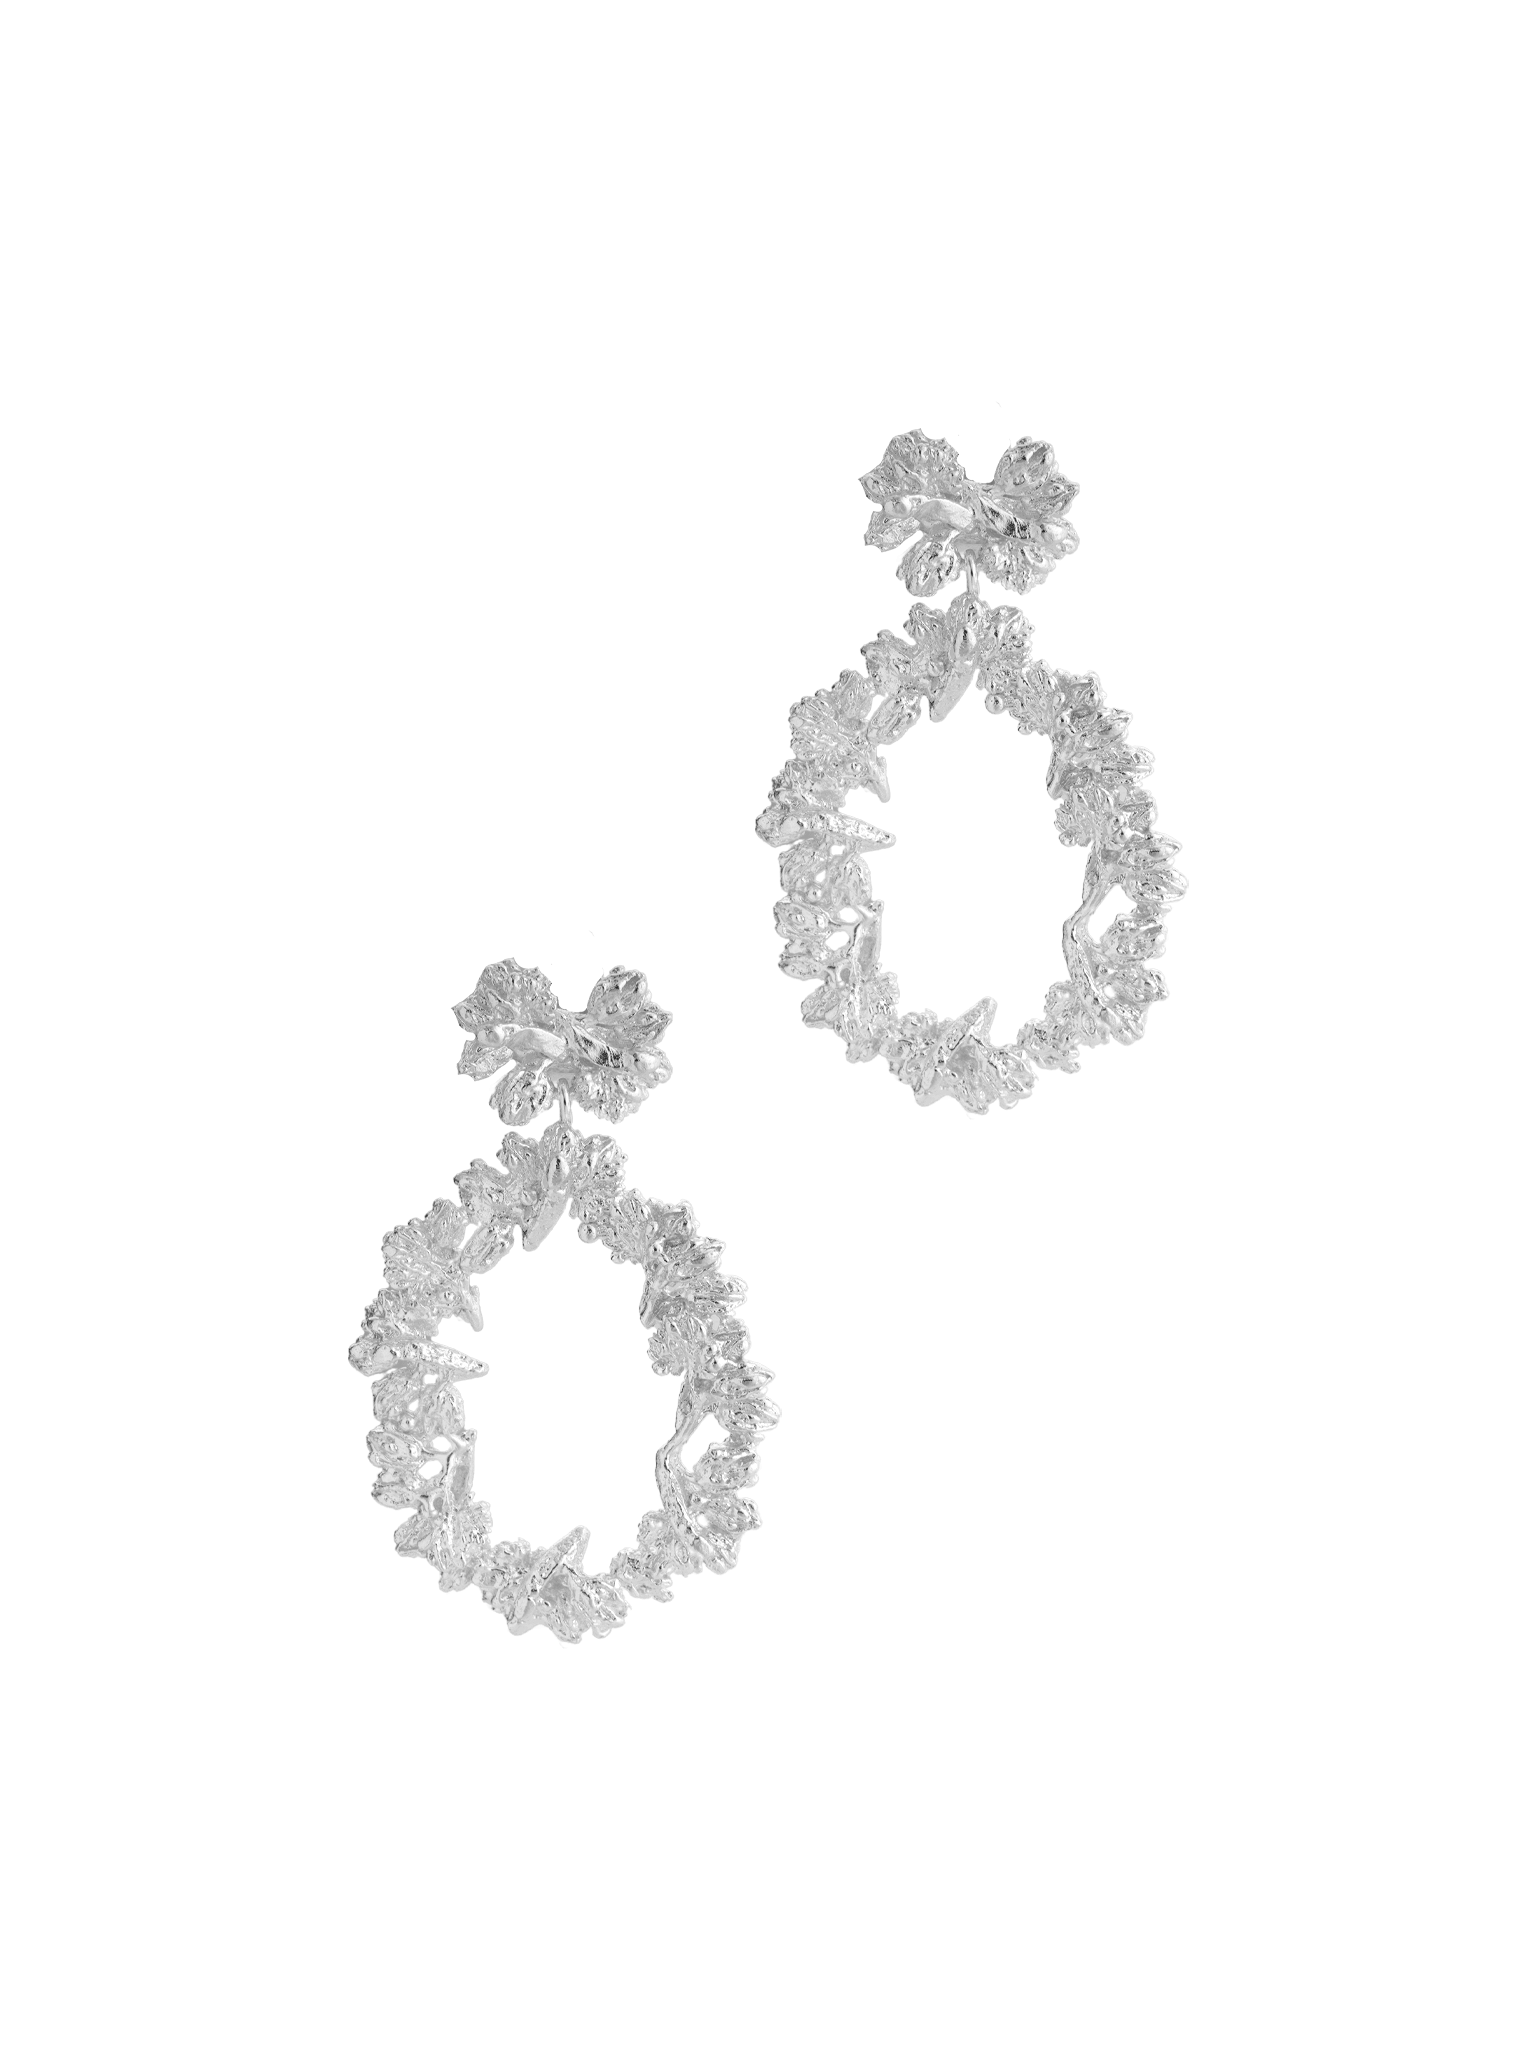 A pair of Cremilde Bispo Jewellery Garden's Delight statement earrings. Handcrafted from sterling silver, these earrings feature meticulously hand-sculpted floral accents and an elegant drop-shaped design that gently sways with grace.